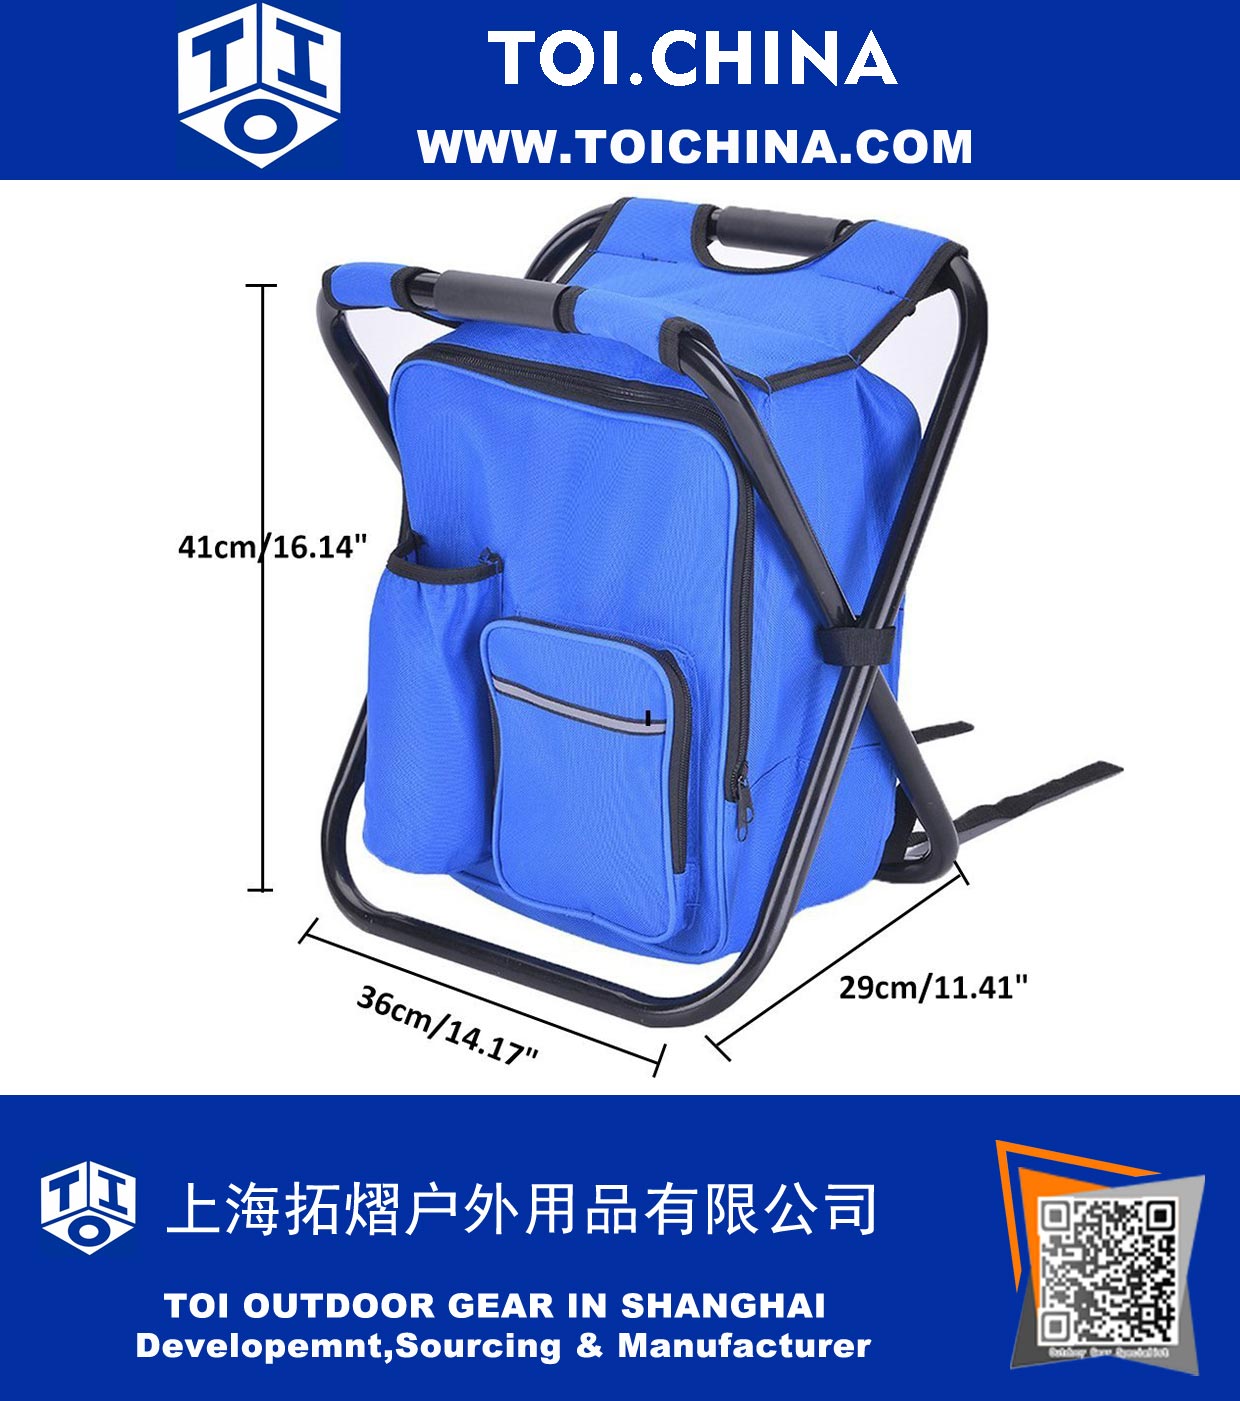 Steel Weight Supported Backpack